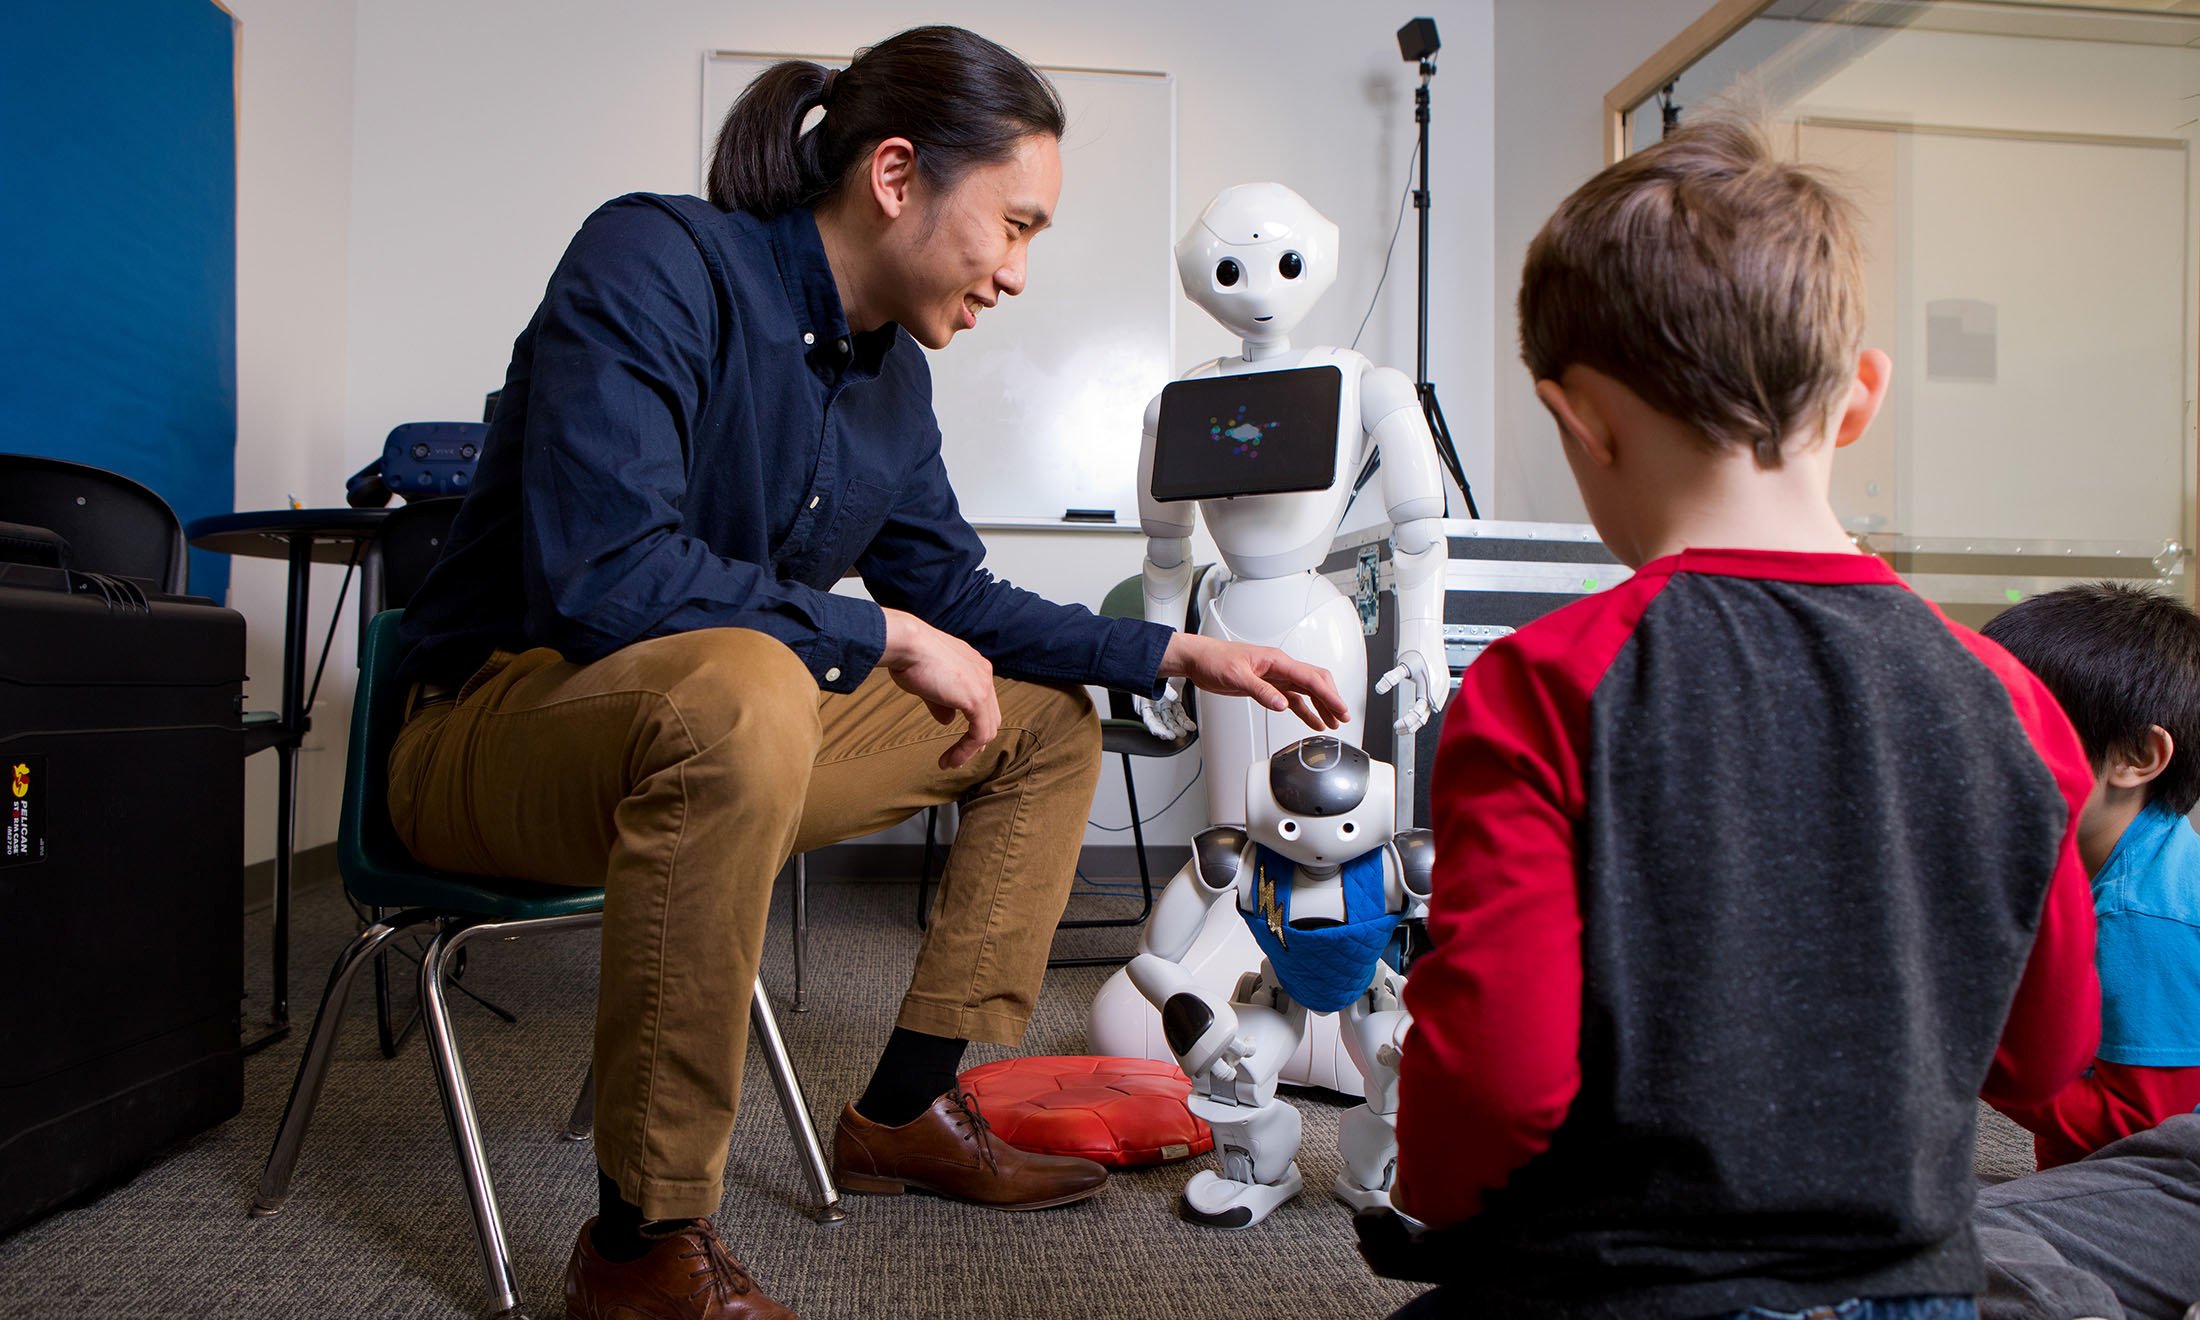 Man sitting on chair showing robots to two children